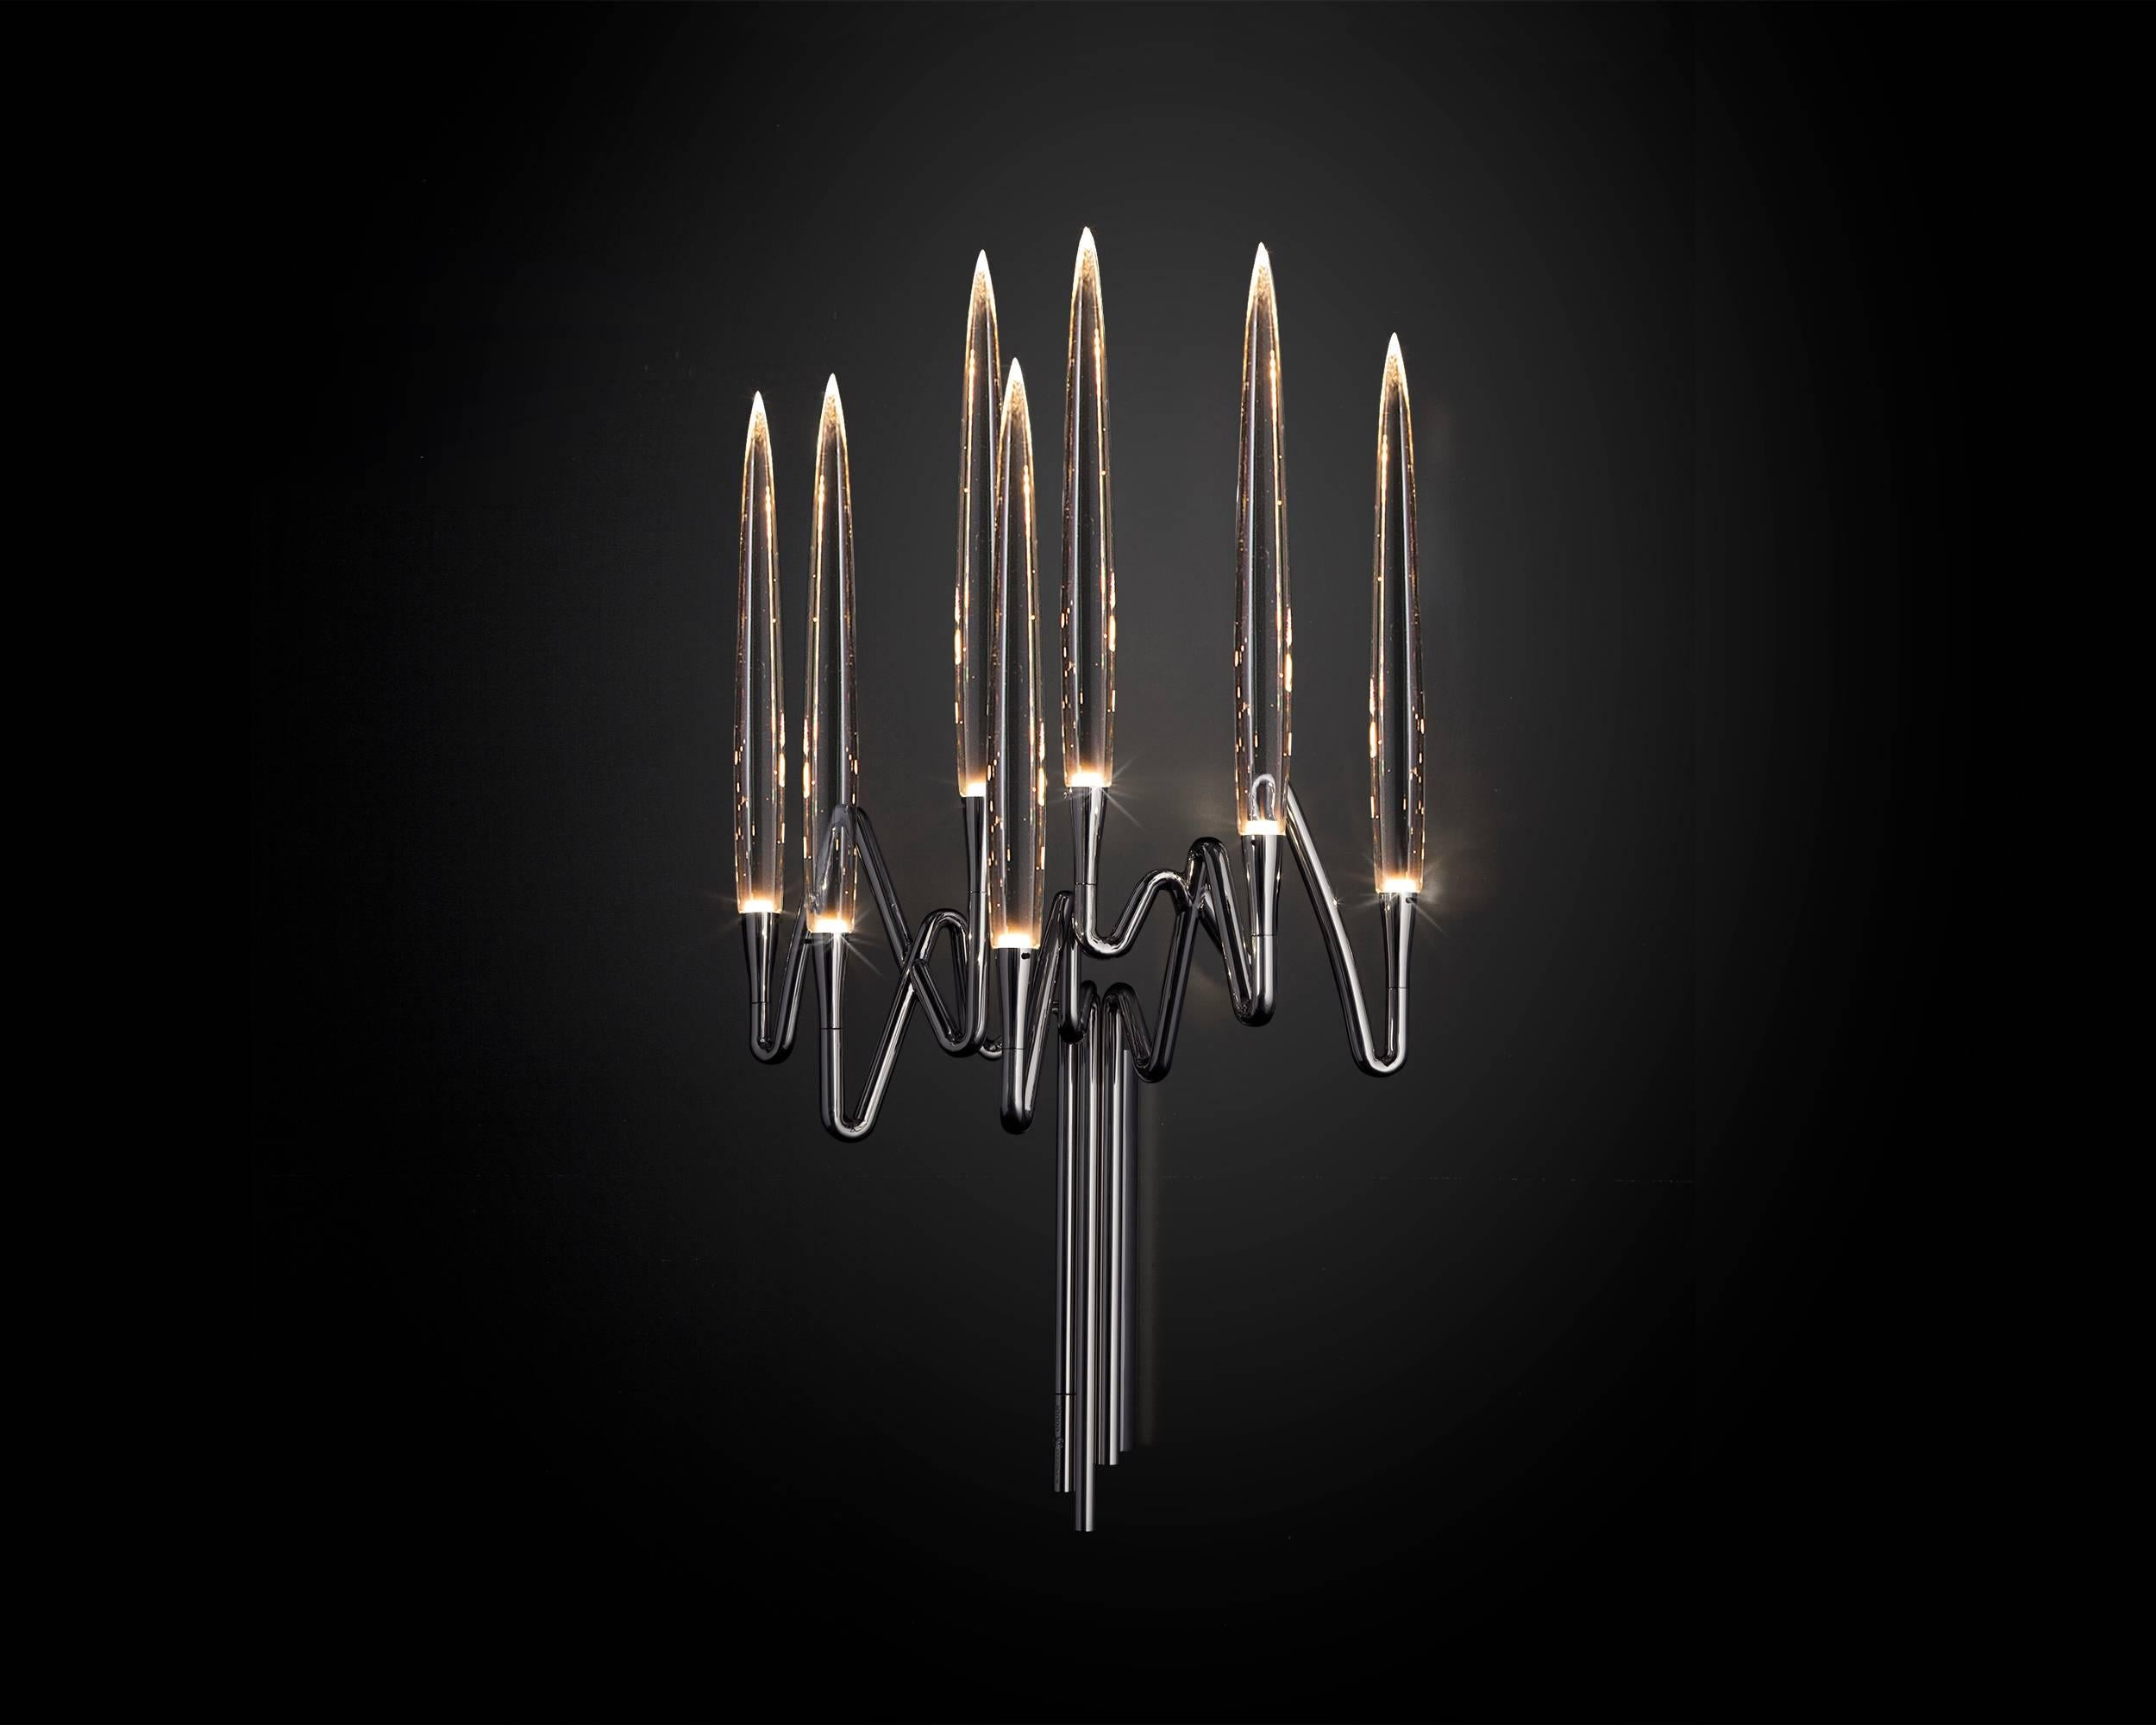 Inspired by Arabic calligraphic art and the icon of the classical candelabrum is Il Pezzo 3 Wall Sconce, with a hand-forged brass structure and elegant “candles” crafted from solid crystal.
The candles are illuminated using the latest LED